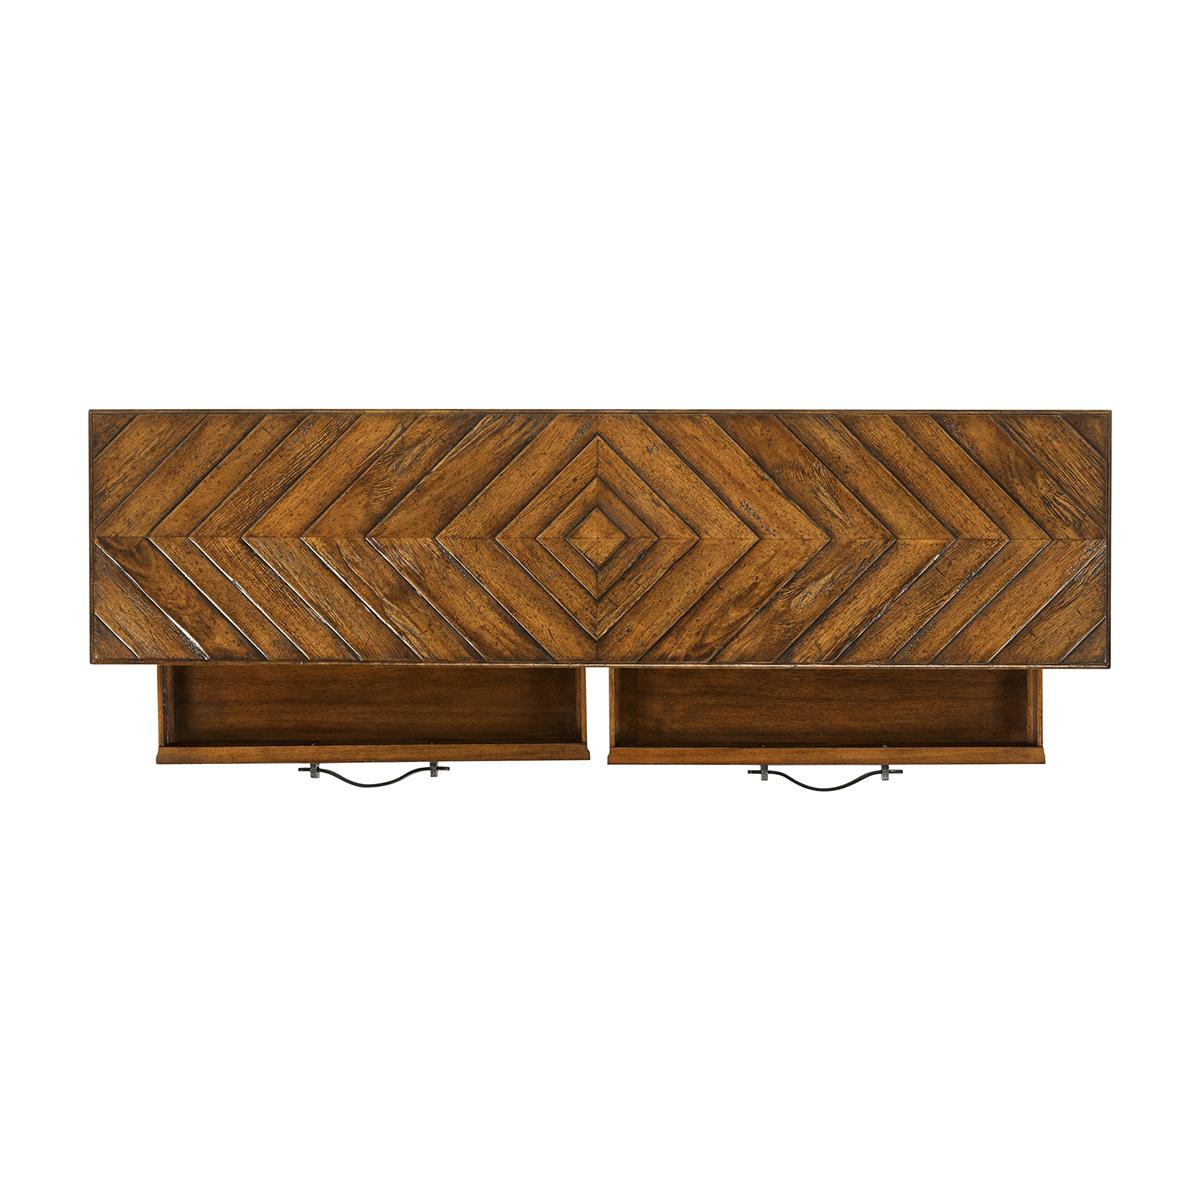 Contemporary French Provincial Console Table, Walnut Finish